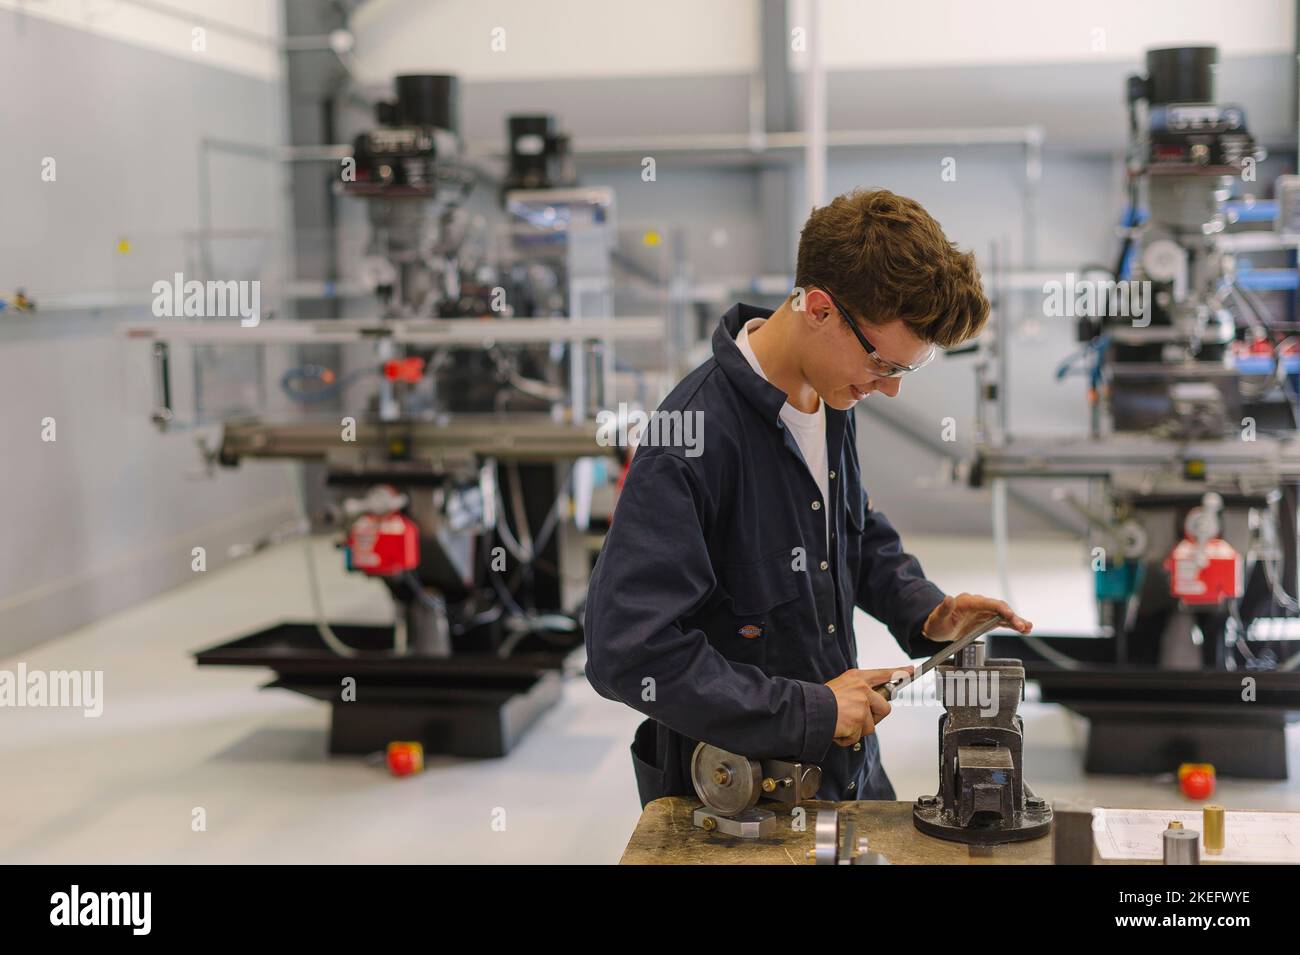 An Engineering student using tools in an engineering centre, college, university. Stock Photo